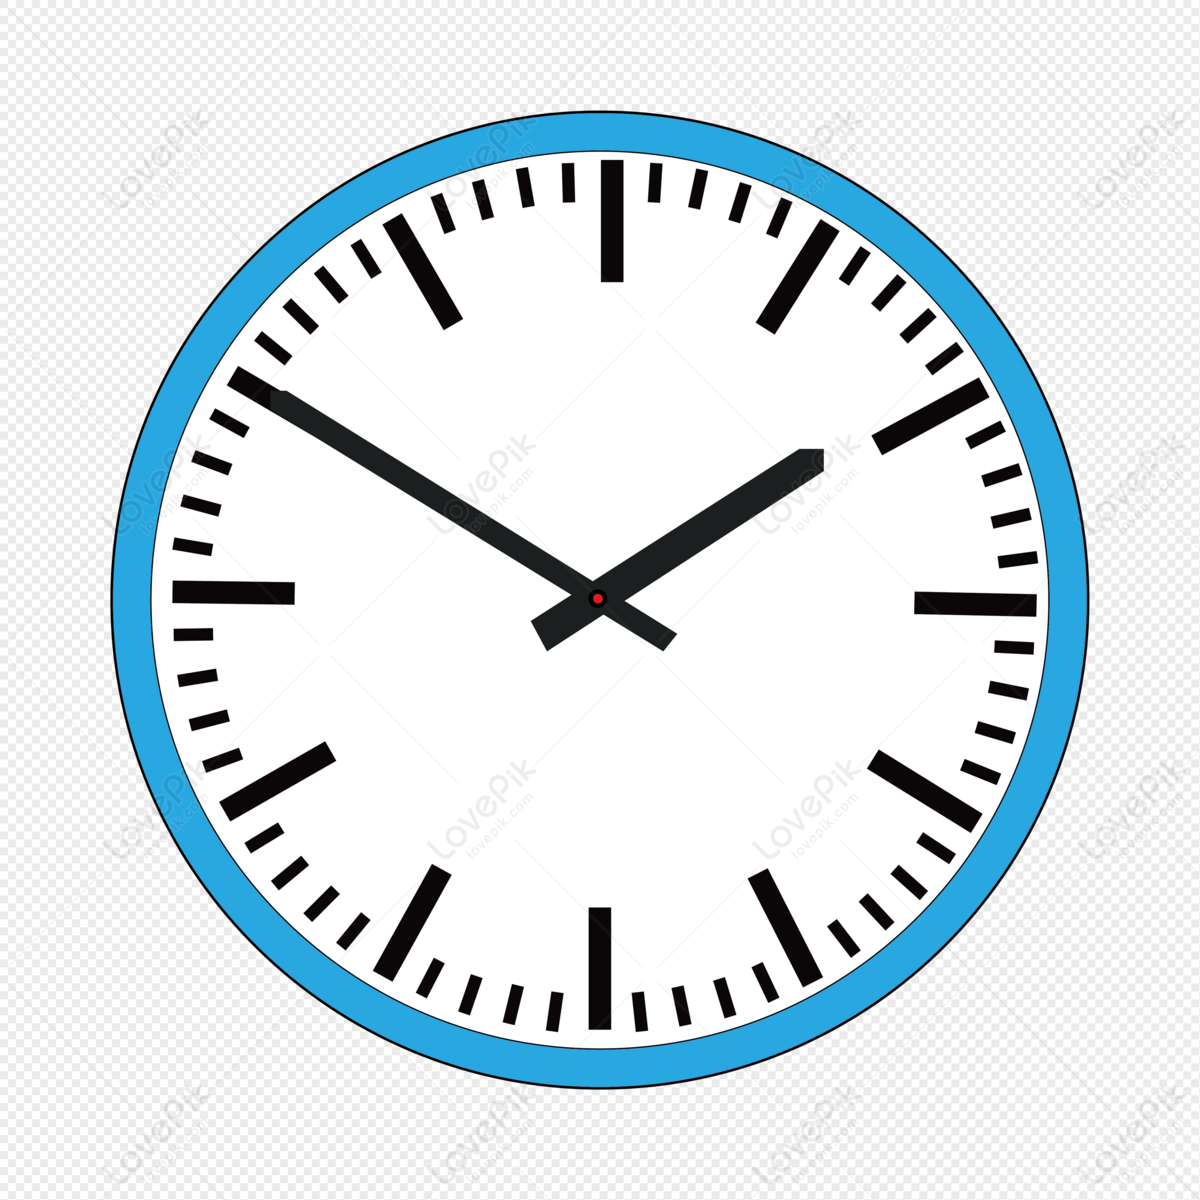 Cartoon Hand Drawn Blue Wall Clock PNG Transparent And Clipart Image For  Free Download - Lovepik | 401425176